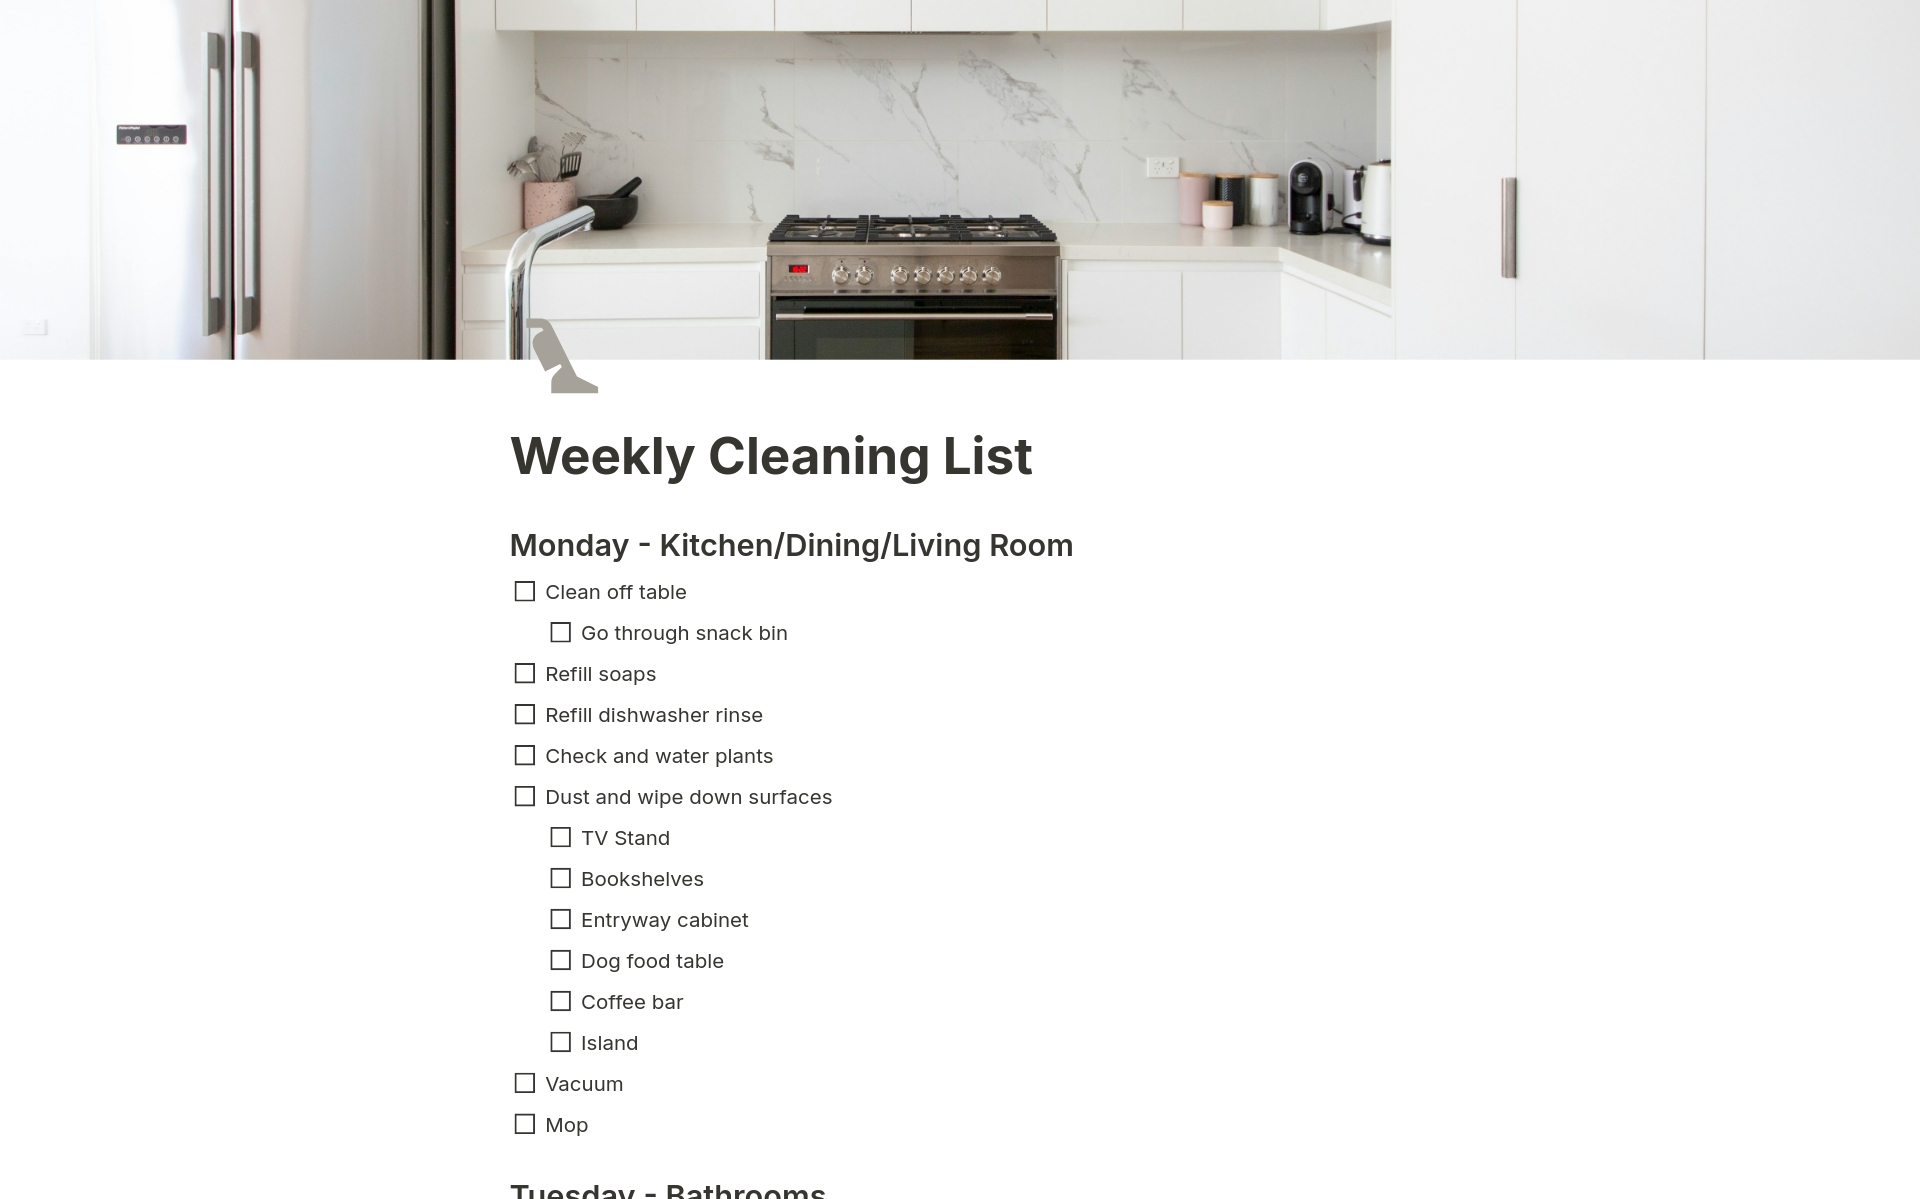 A weekly cleaning list template of to-dos broken down by day and room.